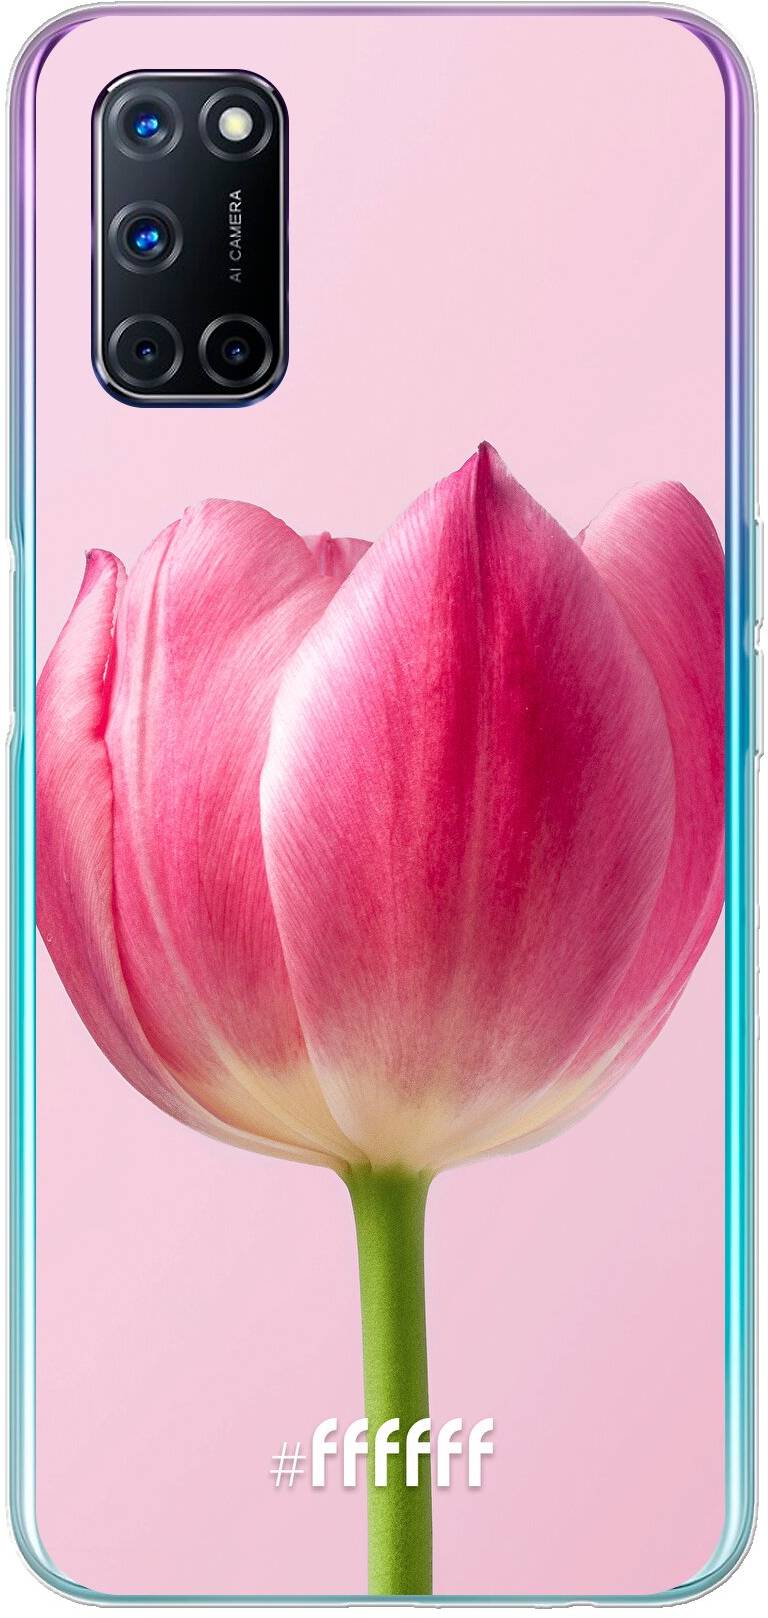 Pink Tulip A72